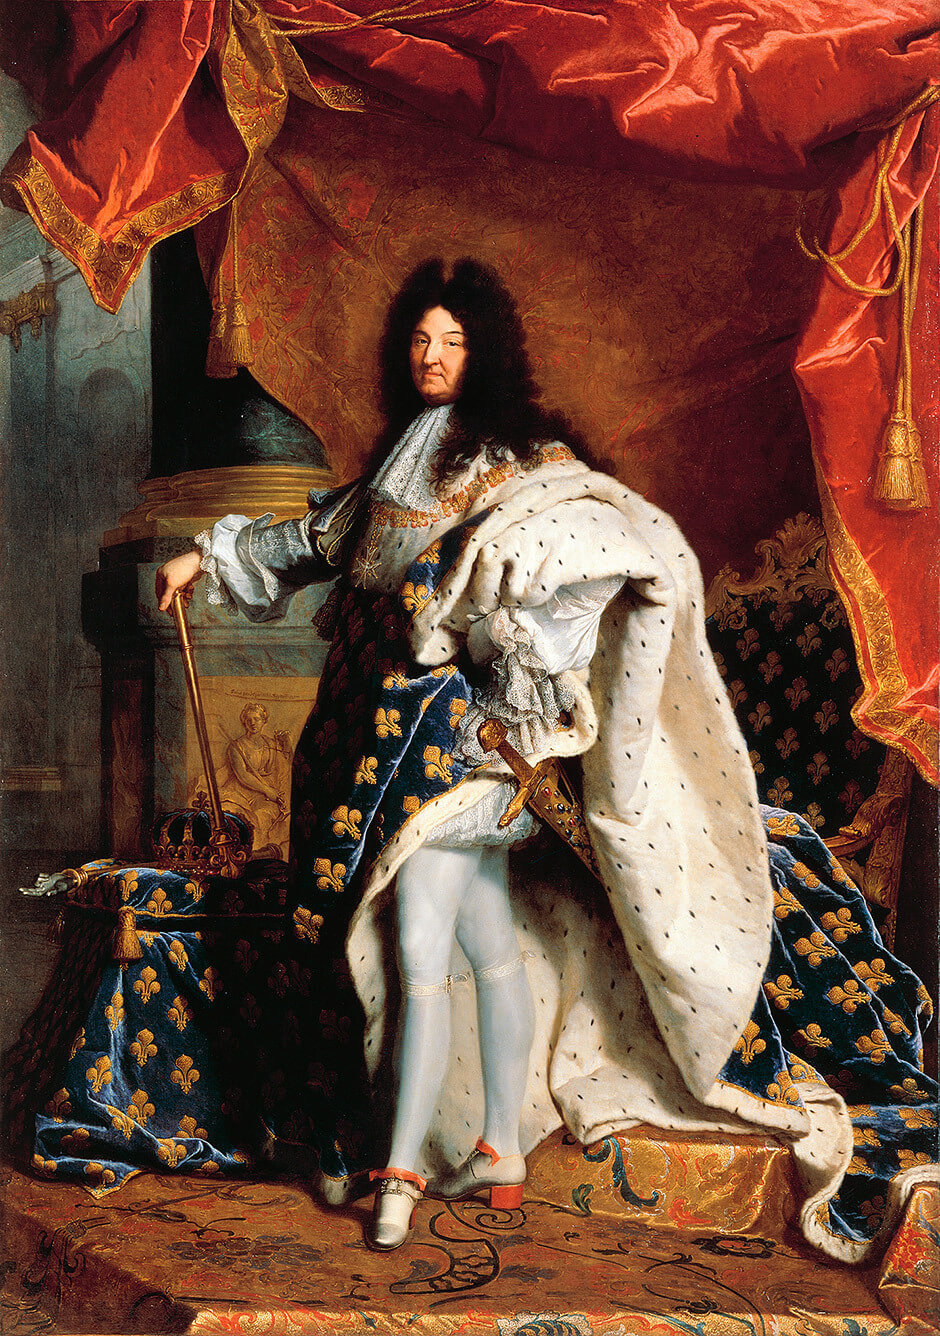 Art Canada Institute, Louis Nicolas, Louis the XIV, 1701, by Hyacinthe Rigaud